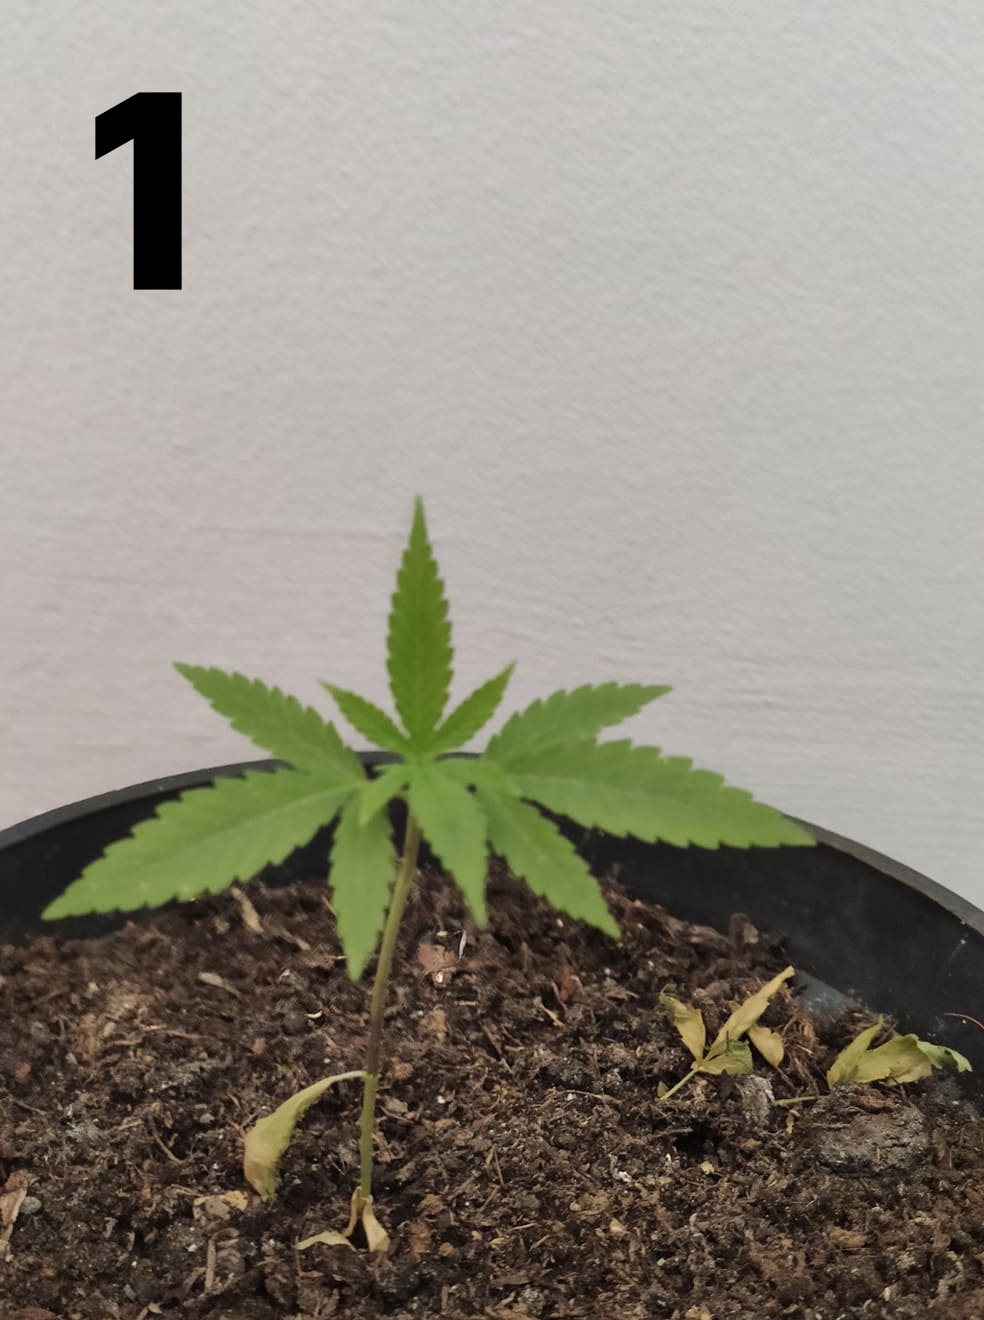 Plants stopped growing problem